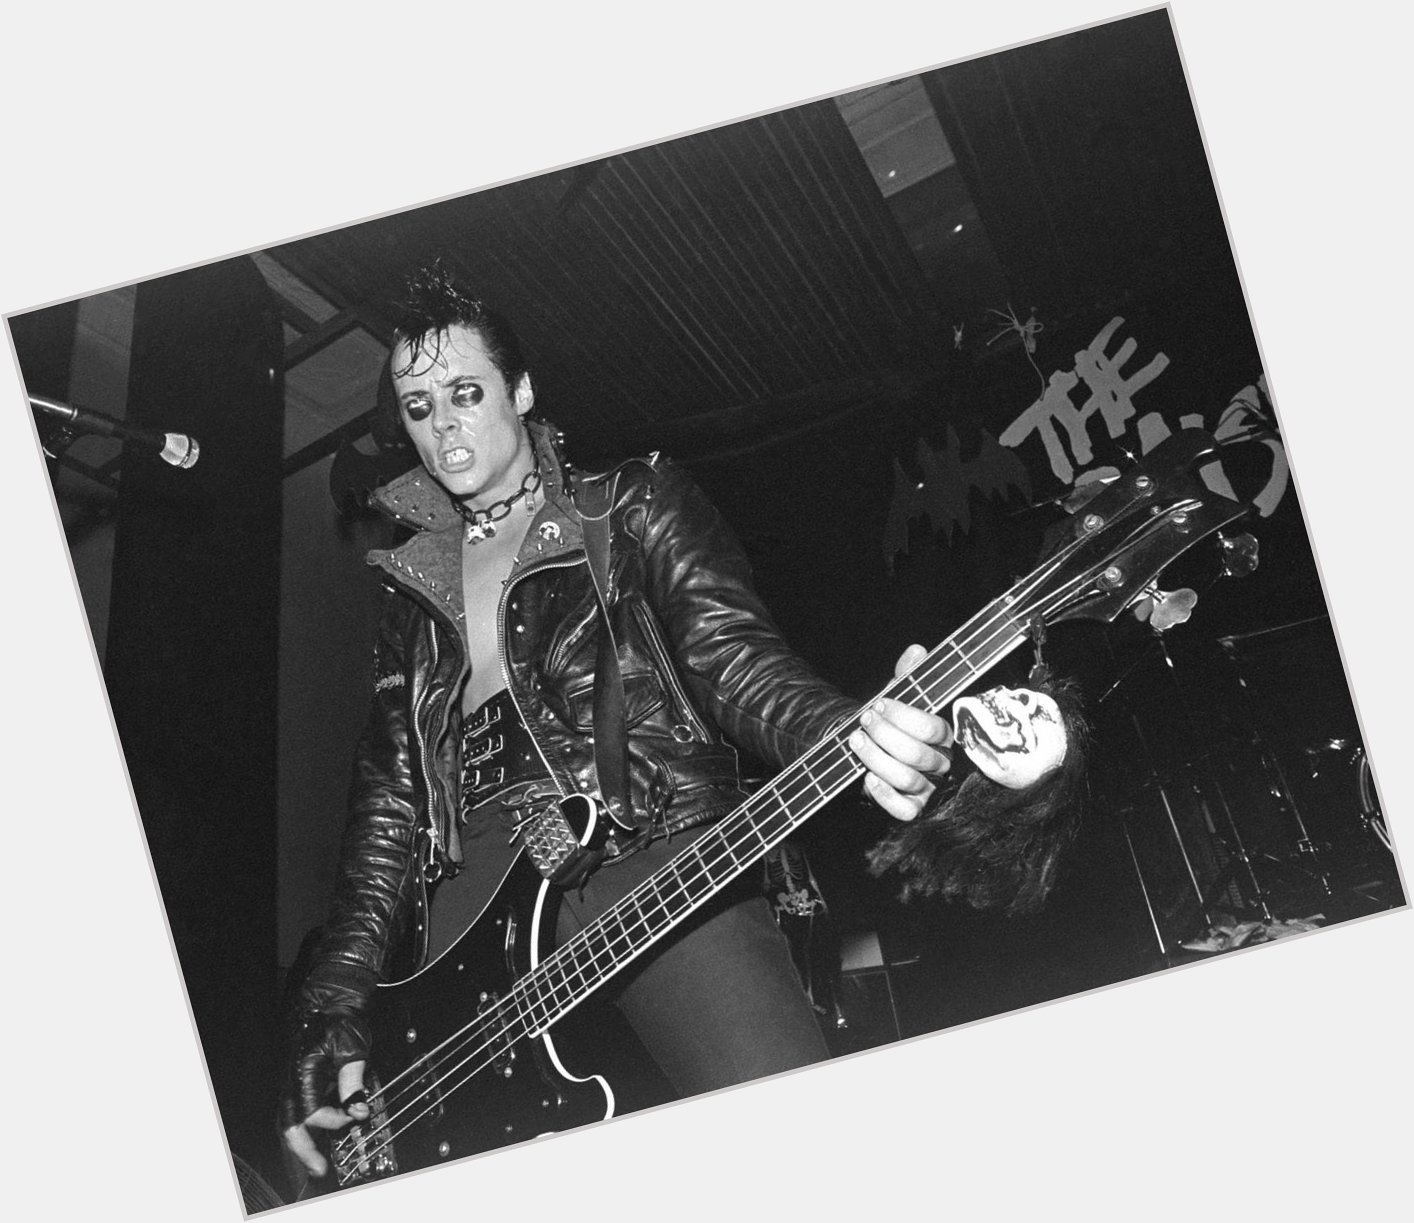 And finally, happy birthday jerry only!!!!!!!!!!! 